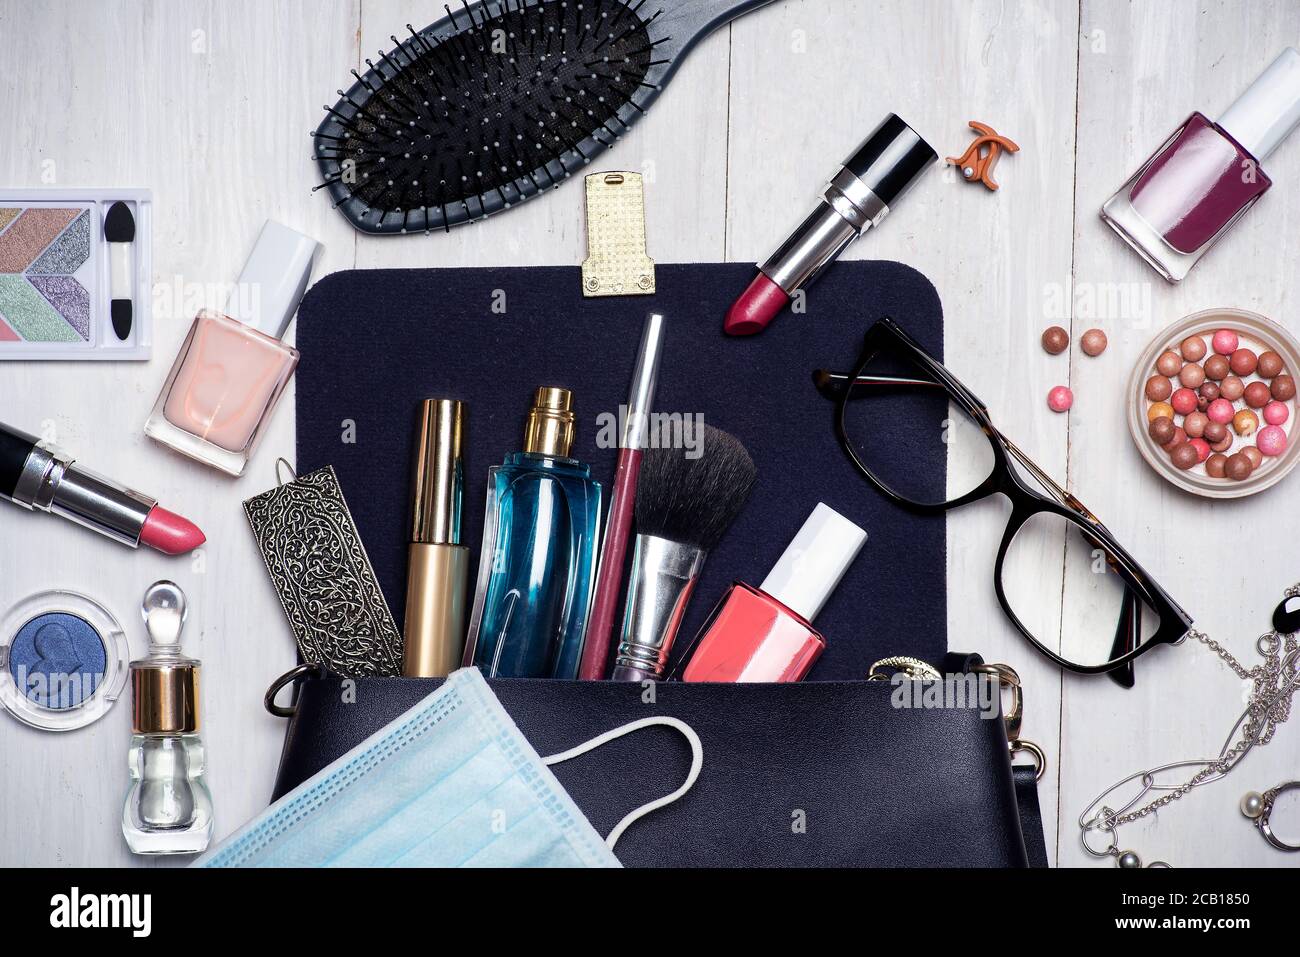 Surgical face mask with various makeup and cosmetic products falling out of an female bag tabletop flat lay Stock Photo